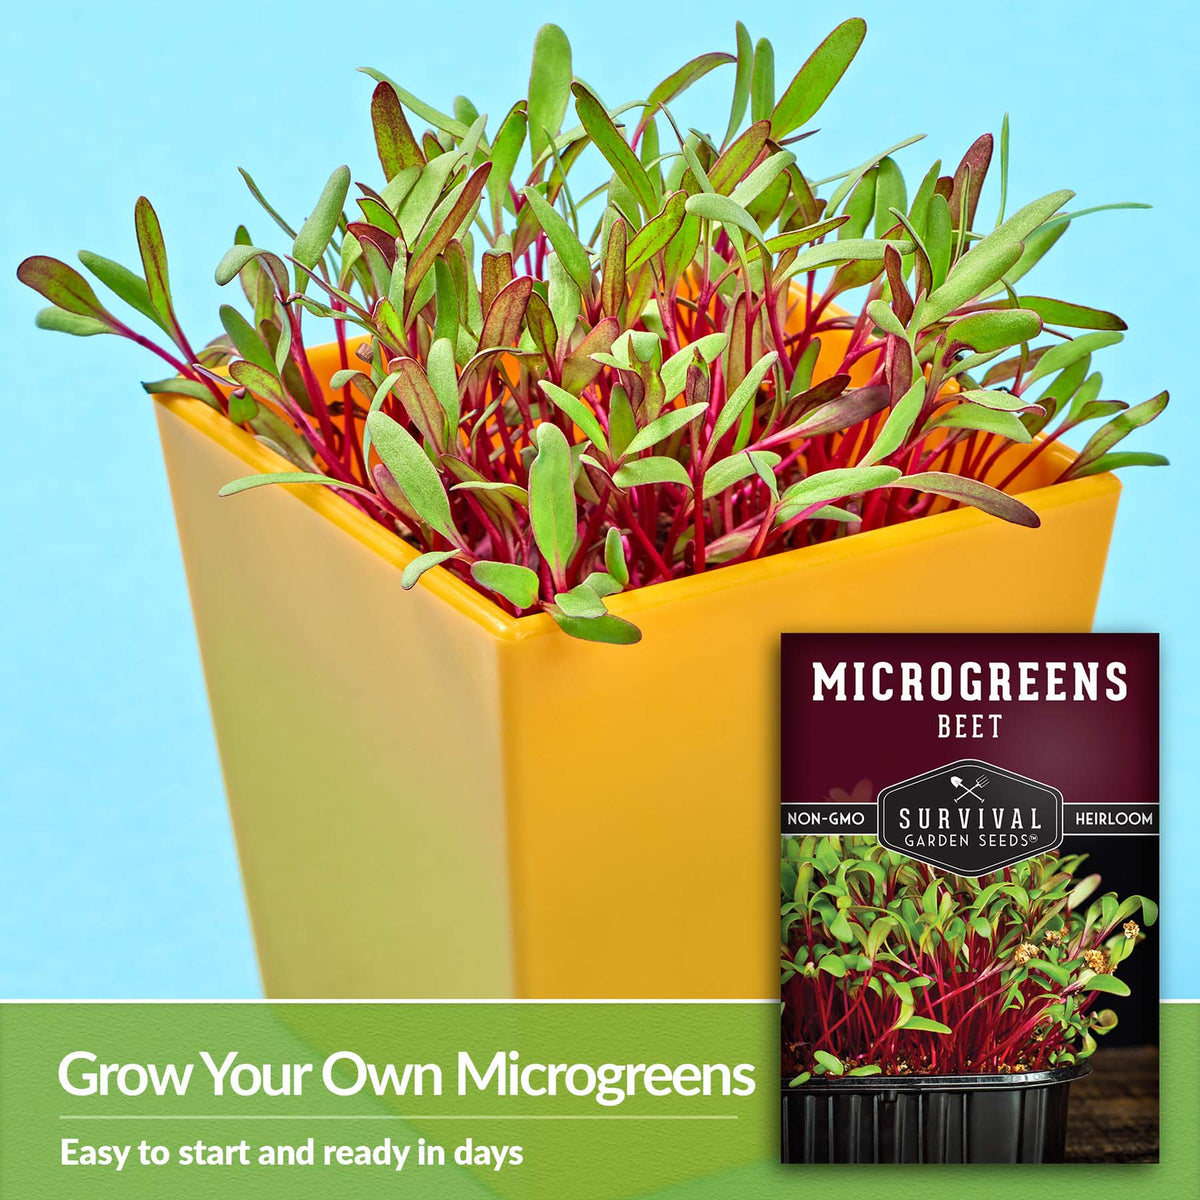 Grow your own microgreens - easy to start and ready in days